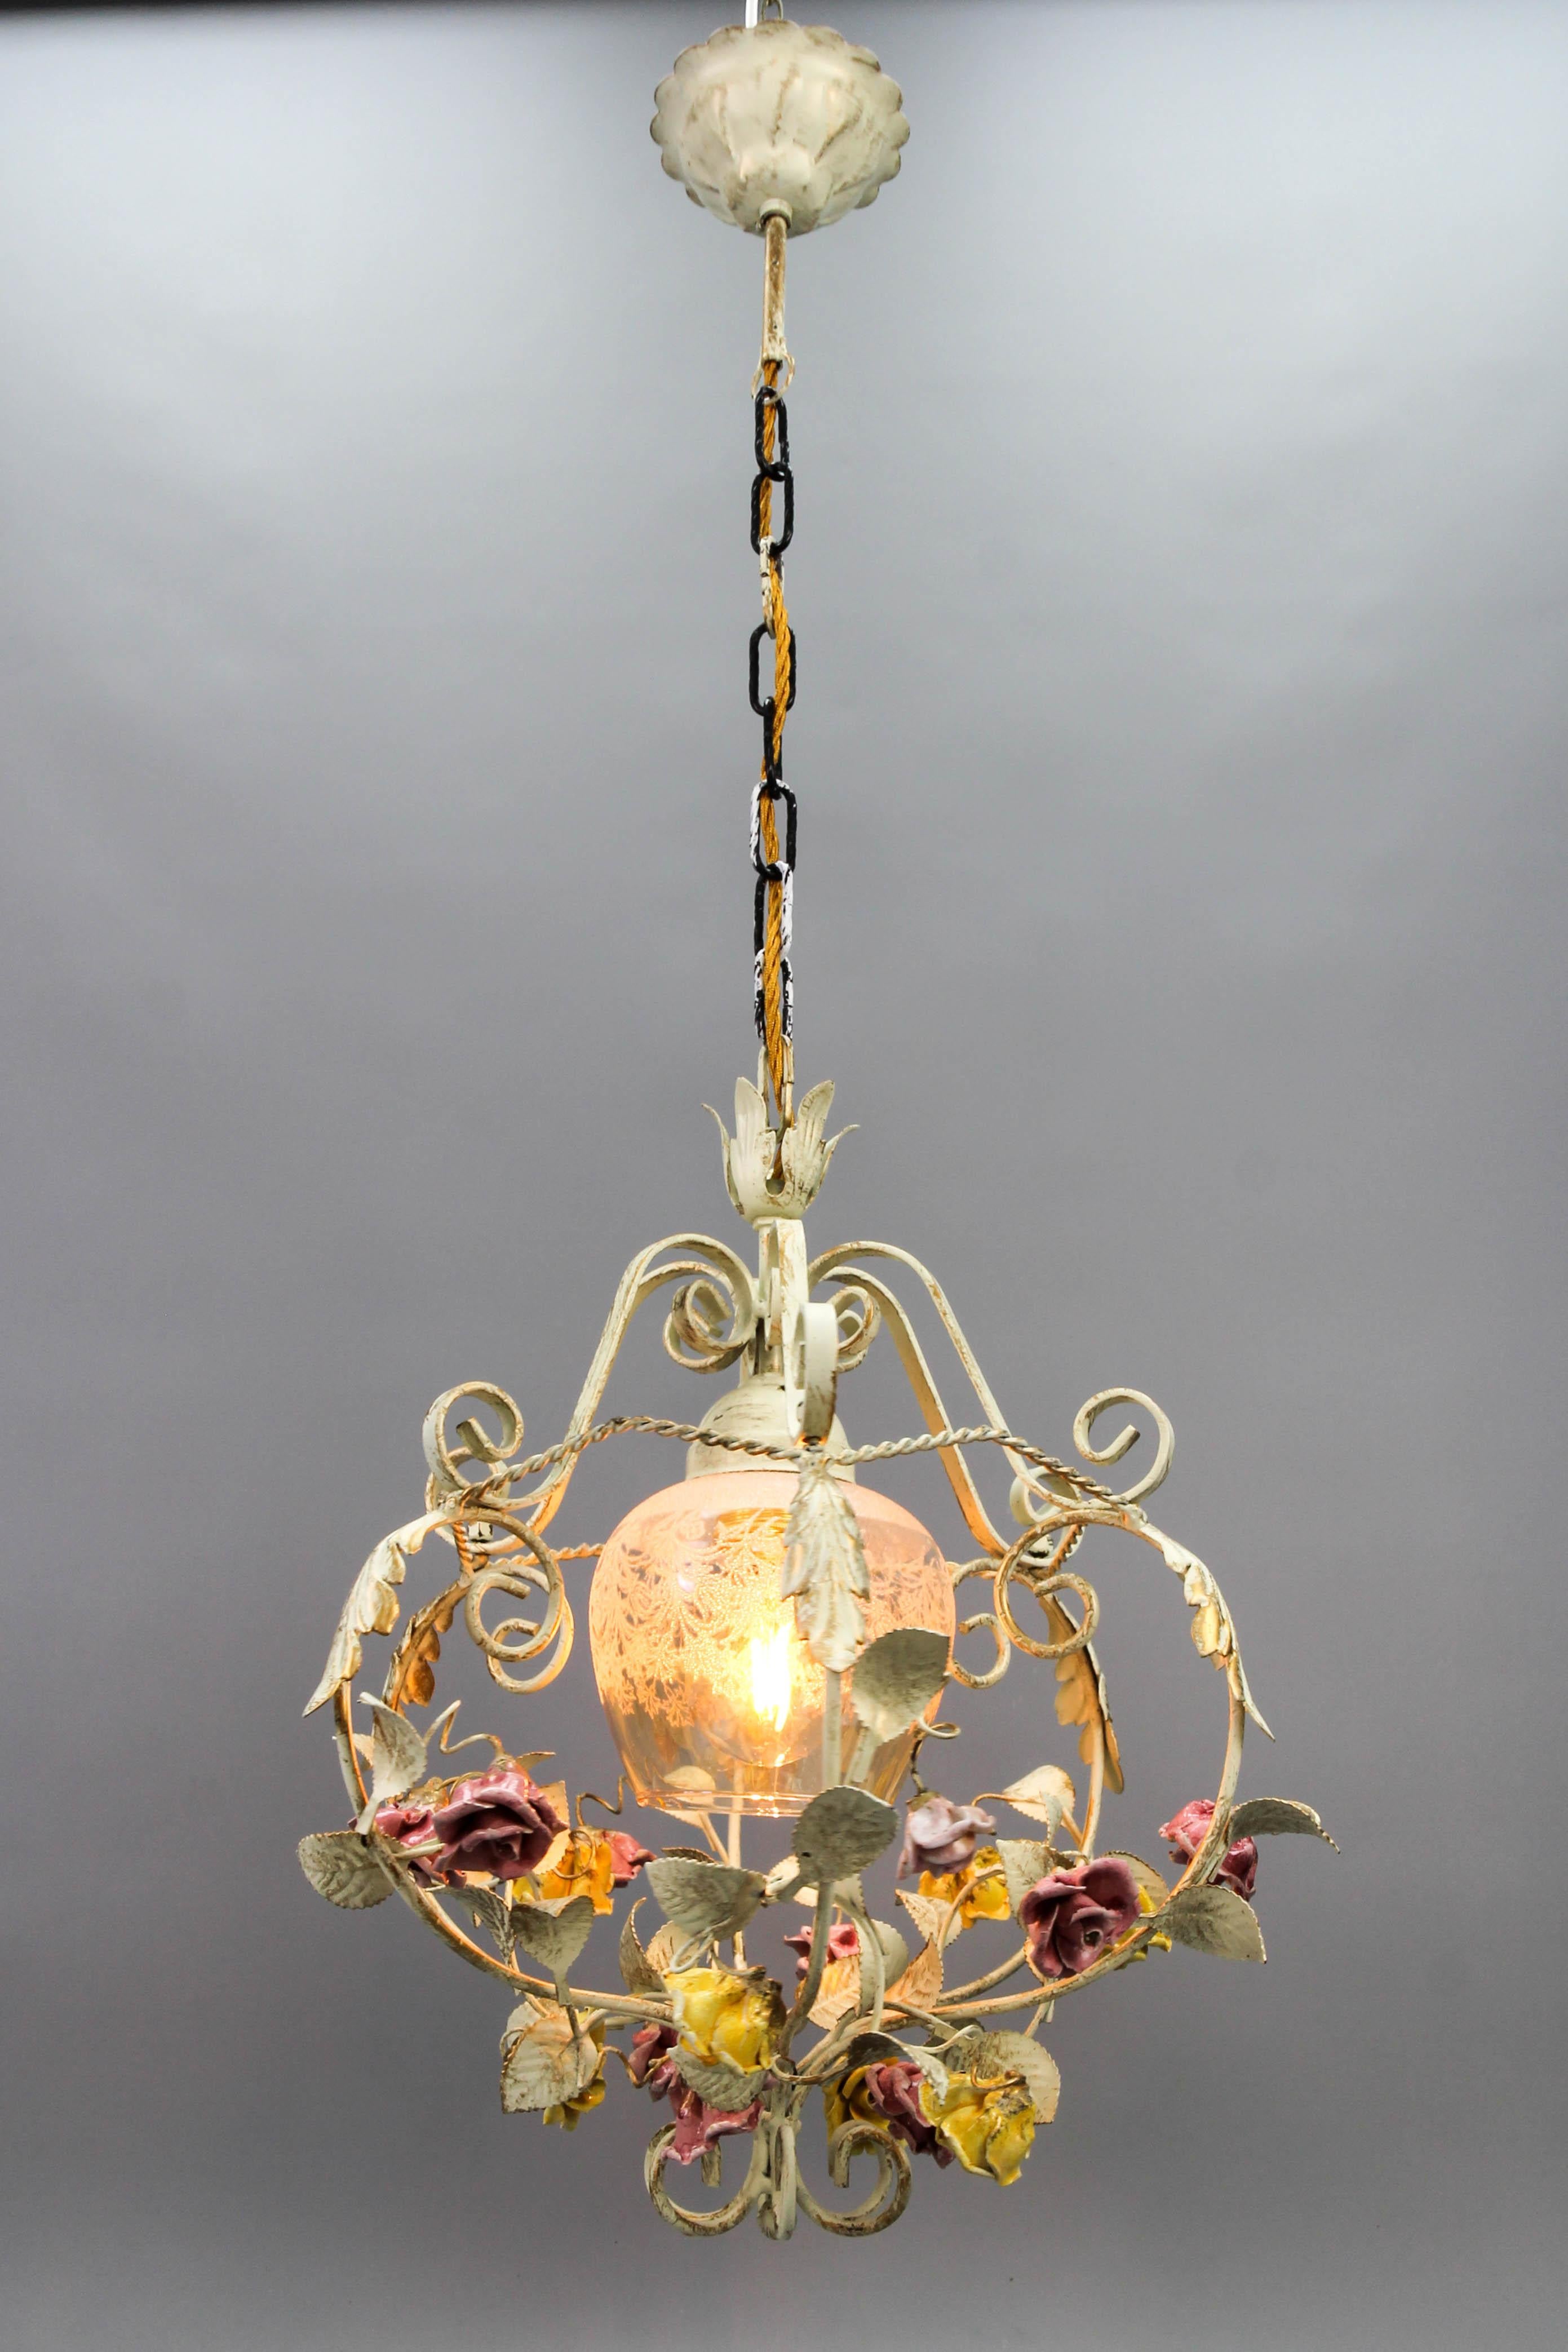 Hollywood Regency Style Metal and Glass Chandelier with Porcelain Roses, 1970s For Sale 1